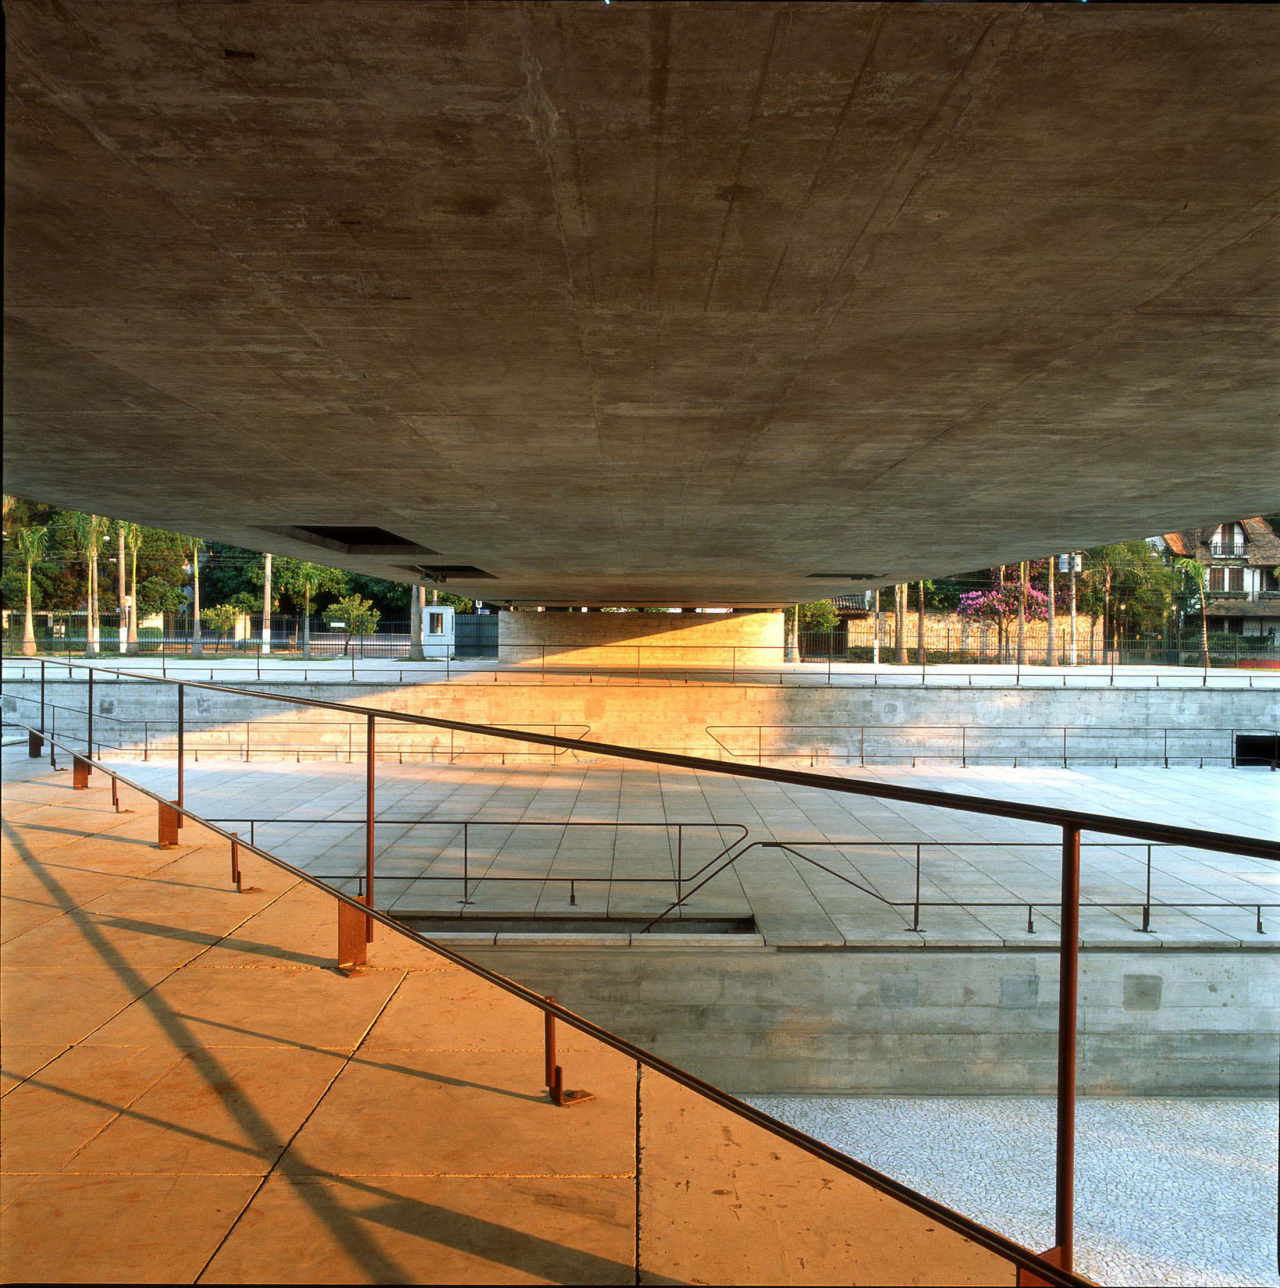 MUSEU - SÃO PAULO - CAD - A VIEW OF THE AMPHITHEATRE UNDER THE PORTICO AT THE BRAZILIAN MUSEUM OF SCULPTURE IN SAO PAULO, DESIGNED IN 1988  BY BRAZILIAN ARCHITECT PAULO MENDES DA ROCHA, IS SHOWN IN THIS UNDATED PUBLICITY PHOTOGRAPH. MENDES DA ROCHA HAS WON THE 2006 PRITZKER ARCHITECTURE PRIZE FOR HIS HALF CENTURY OF WORK, WHICH BROUGHT BEAUTY AND ORDER TO A GRITTY AND CHAOTIC SAO PAULO. MENDES DA ROCHA, 77, IS THE SECOND BRAZILIAN TO WIN THE SO-CALLED 'NOBEL FOR ARCHITECTURE' AFTER OSCAR NIEMEYER WON THE AWARD IN 1988. REUTERS/NELSON KON/PRITZKER ARCHITECTURE PRIZE/HANDOUT